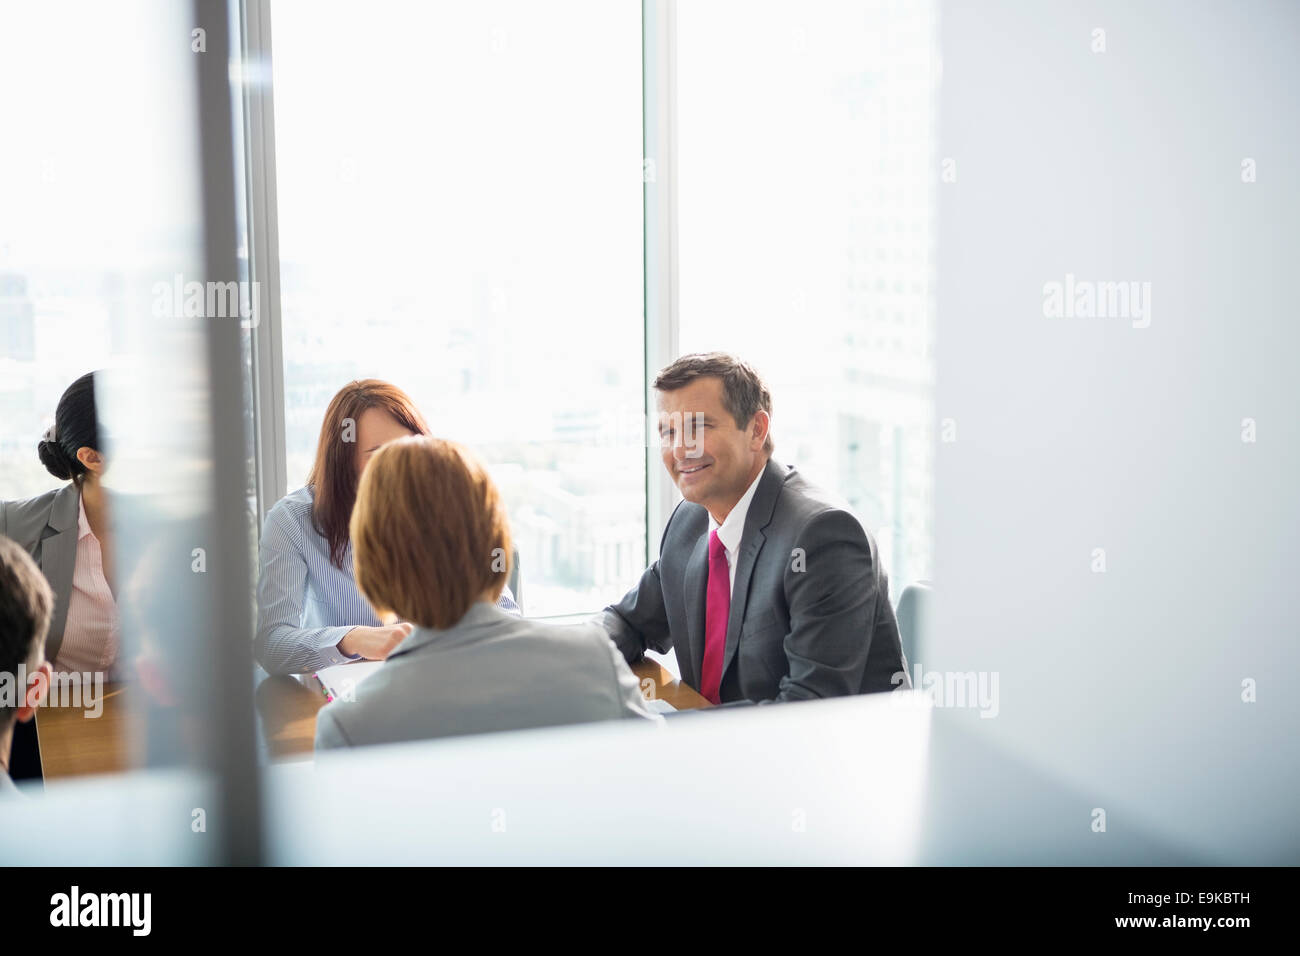 Businesspeople in conference room Stock Photo